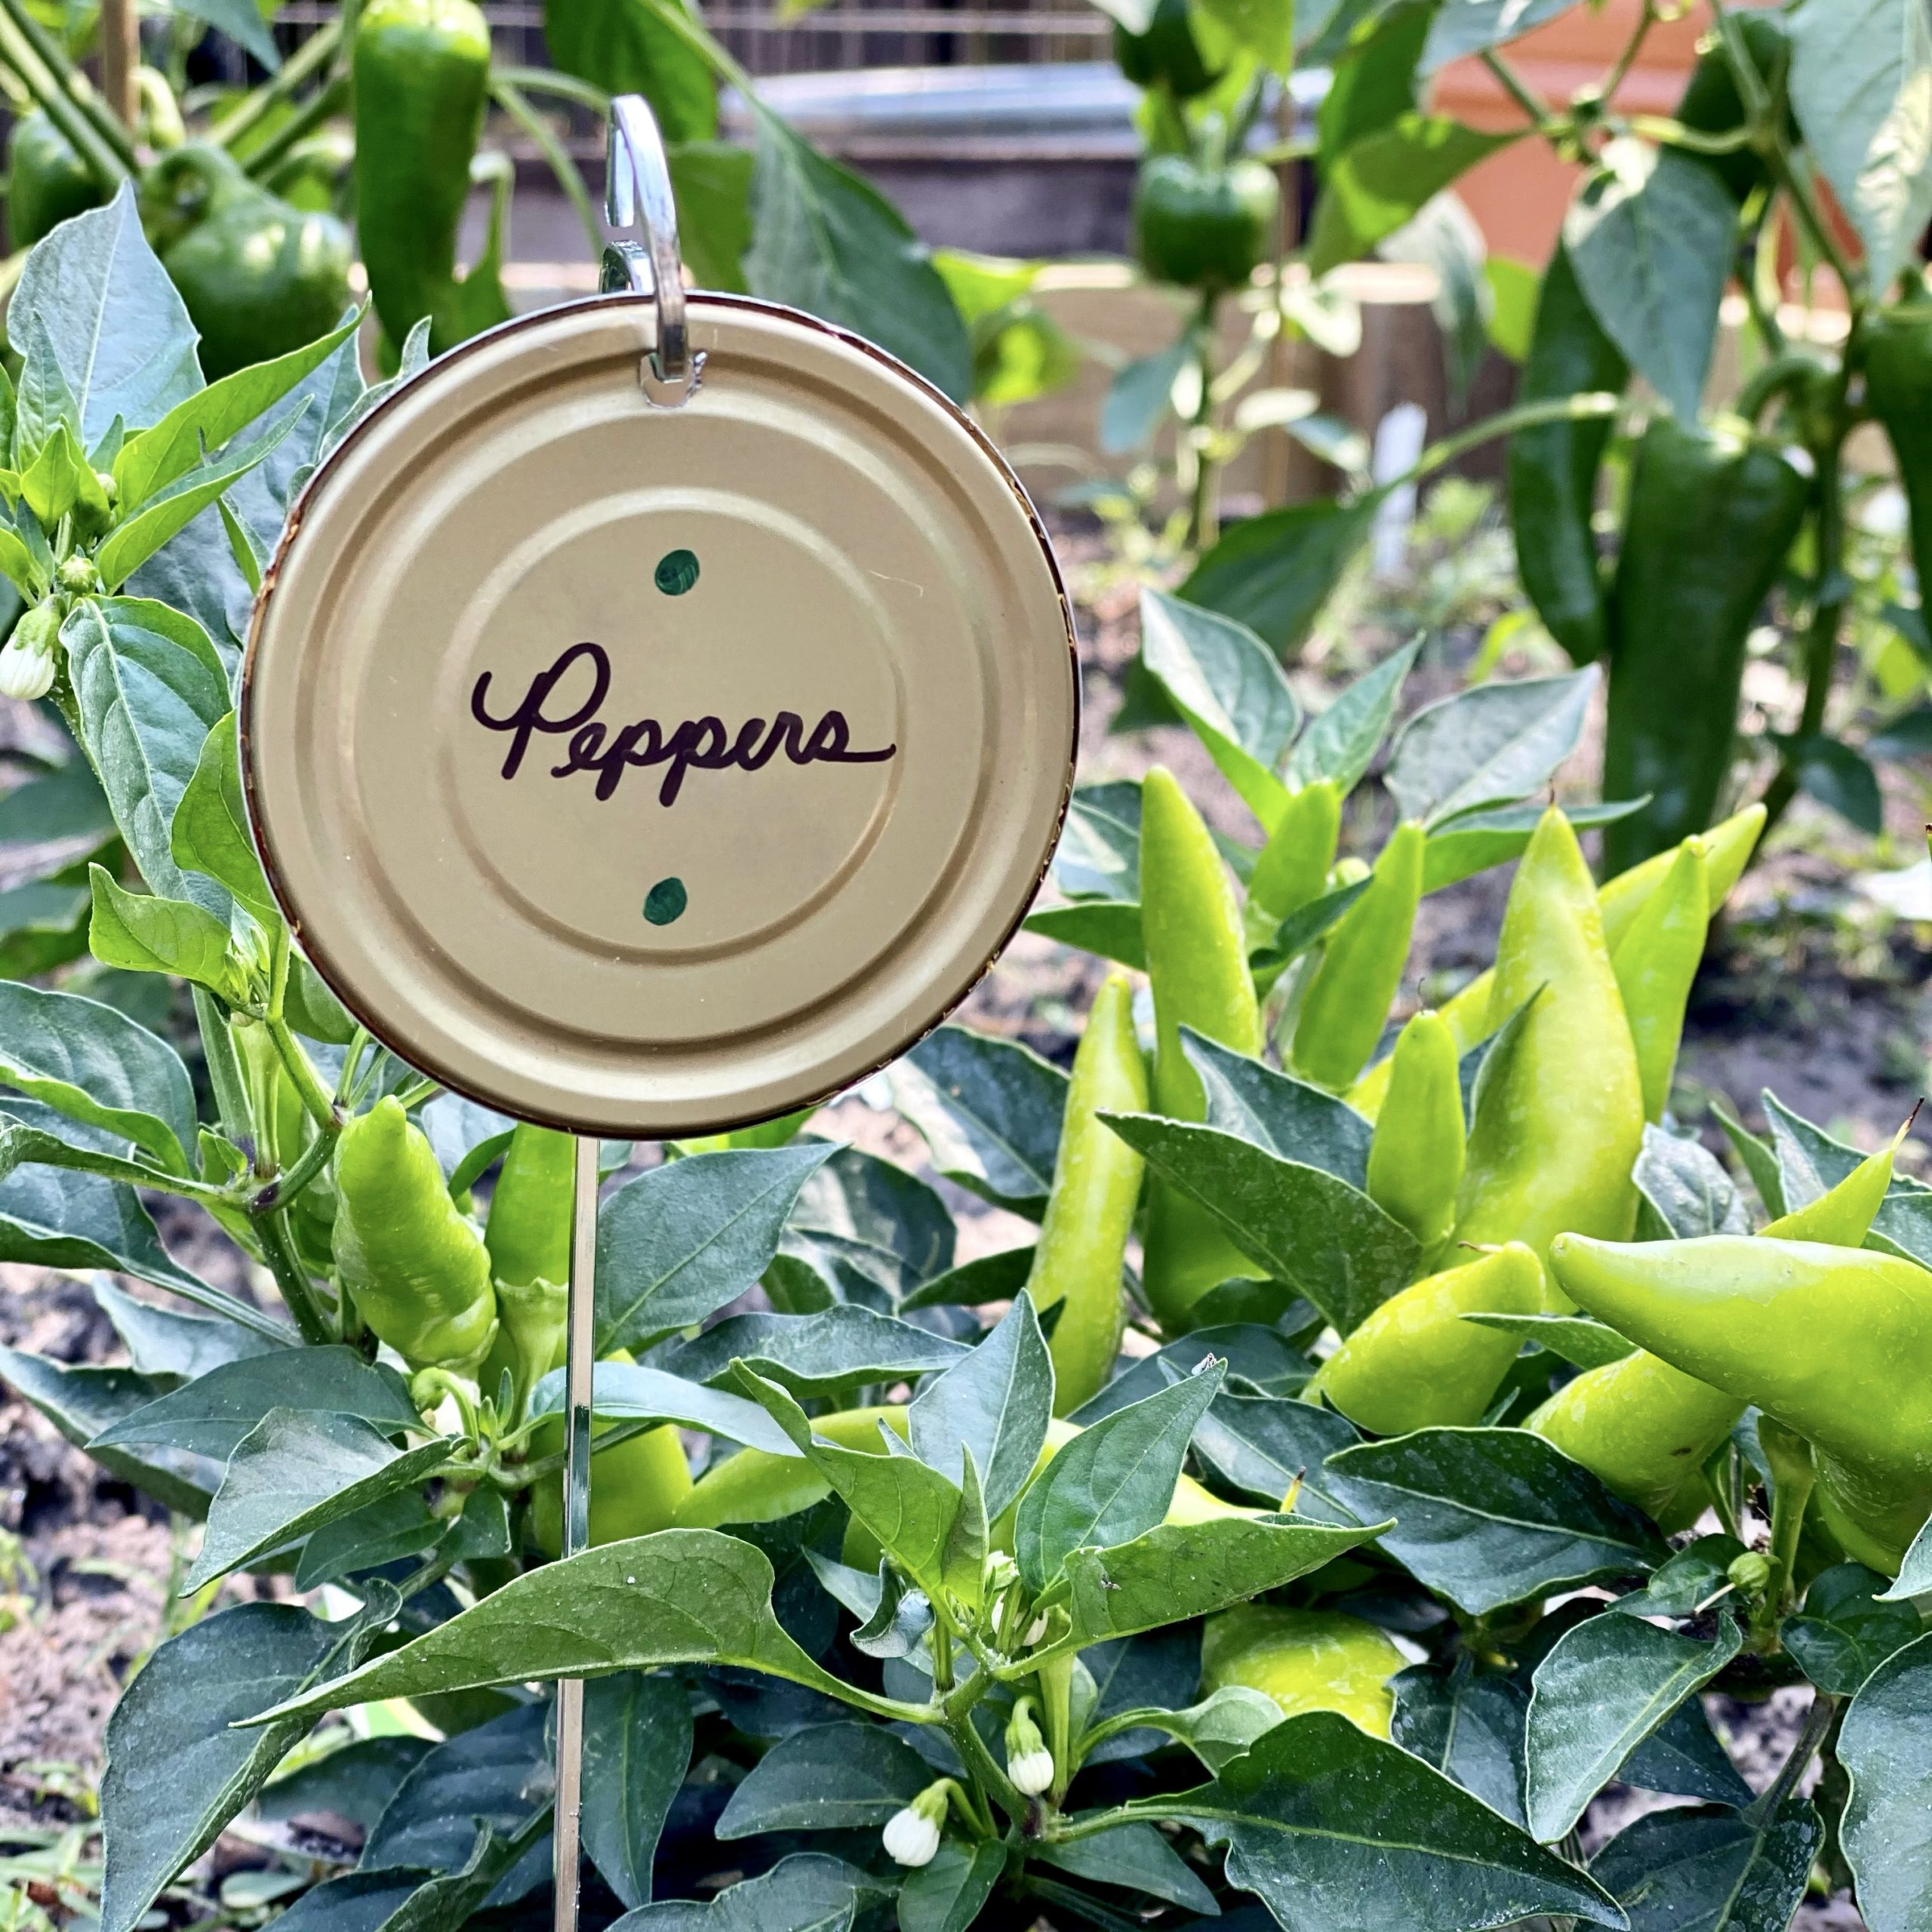 DIY garden marker with "peppers" written on it next to a pepper plant.